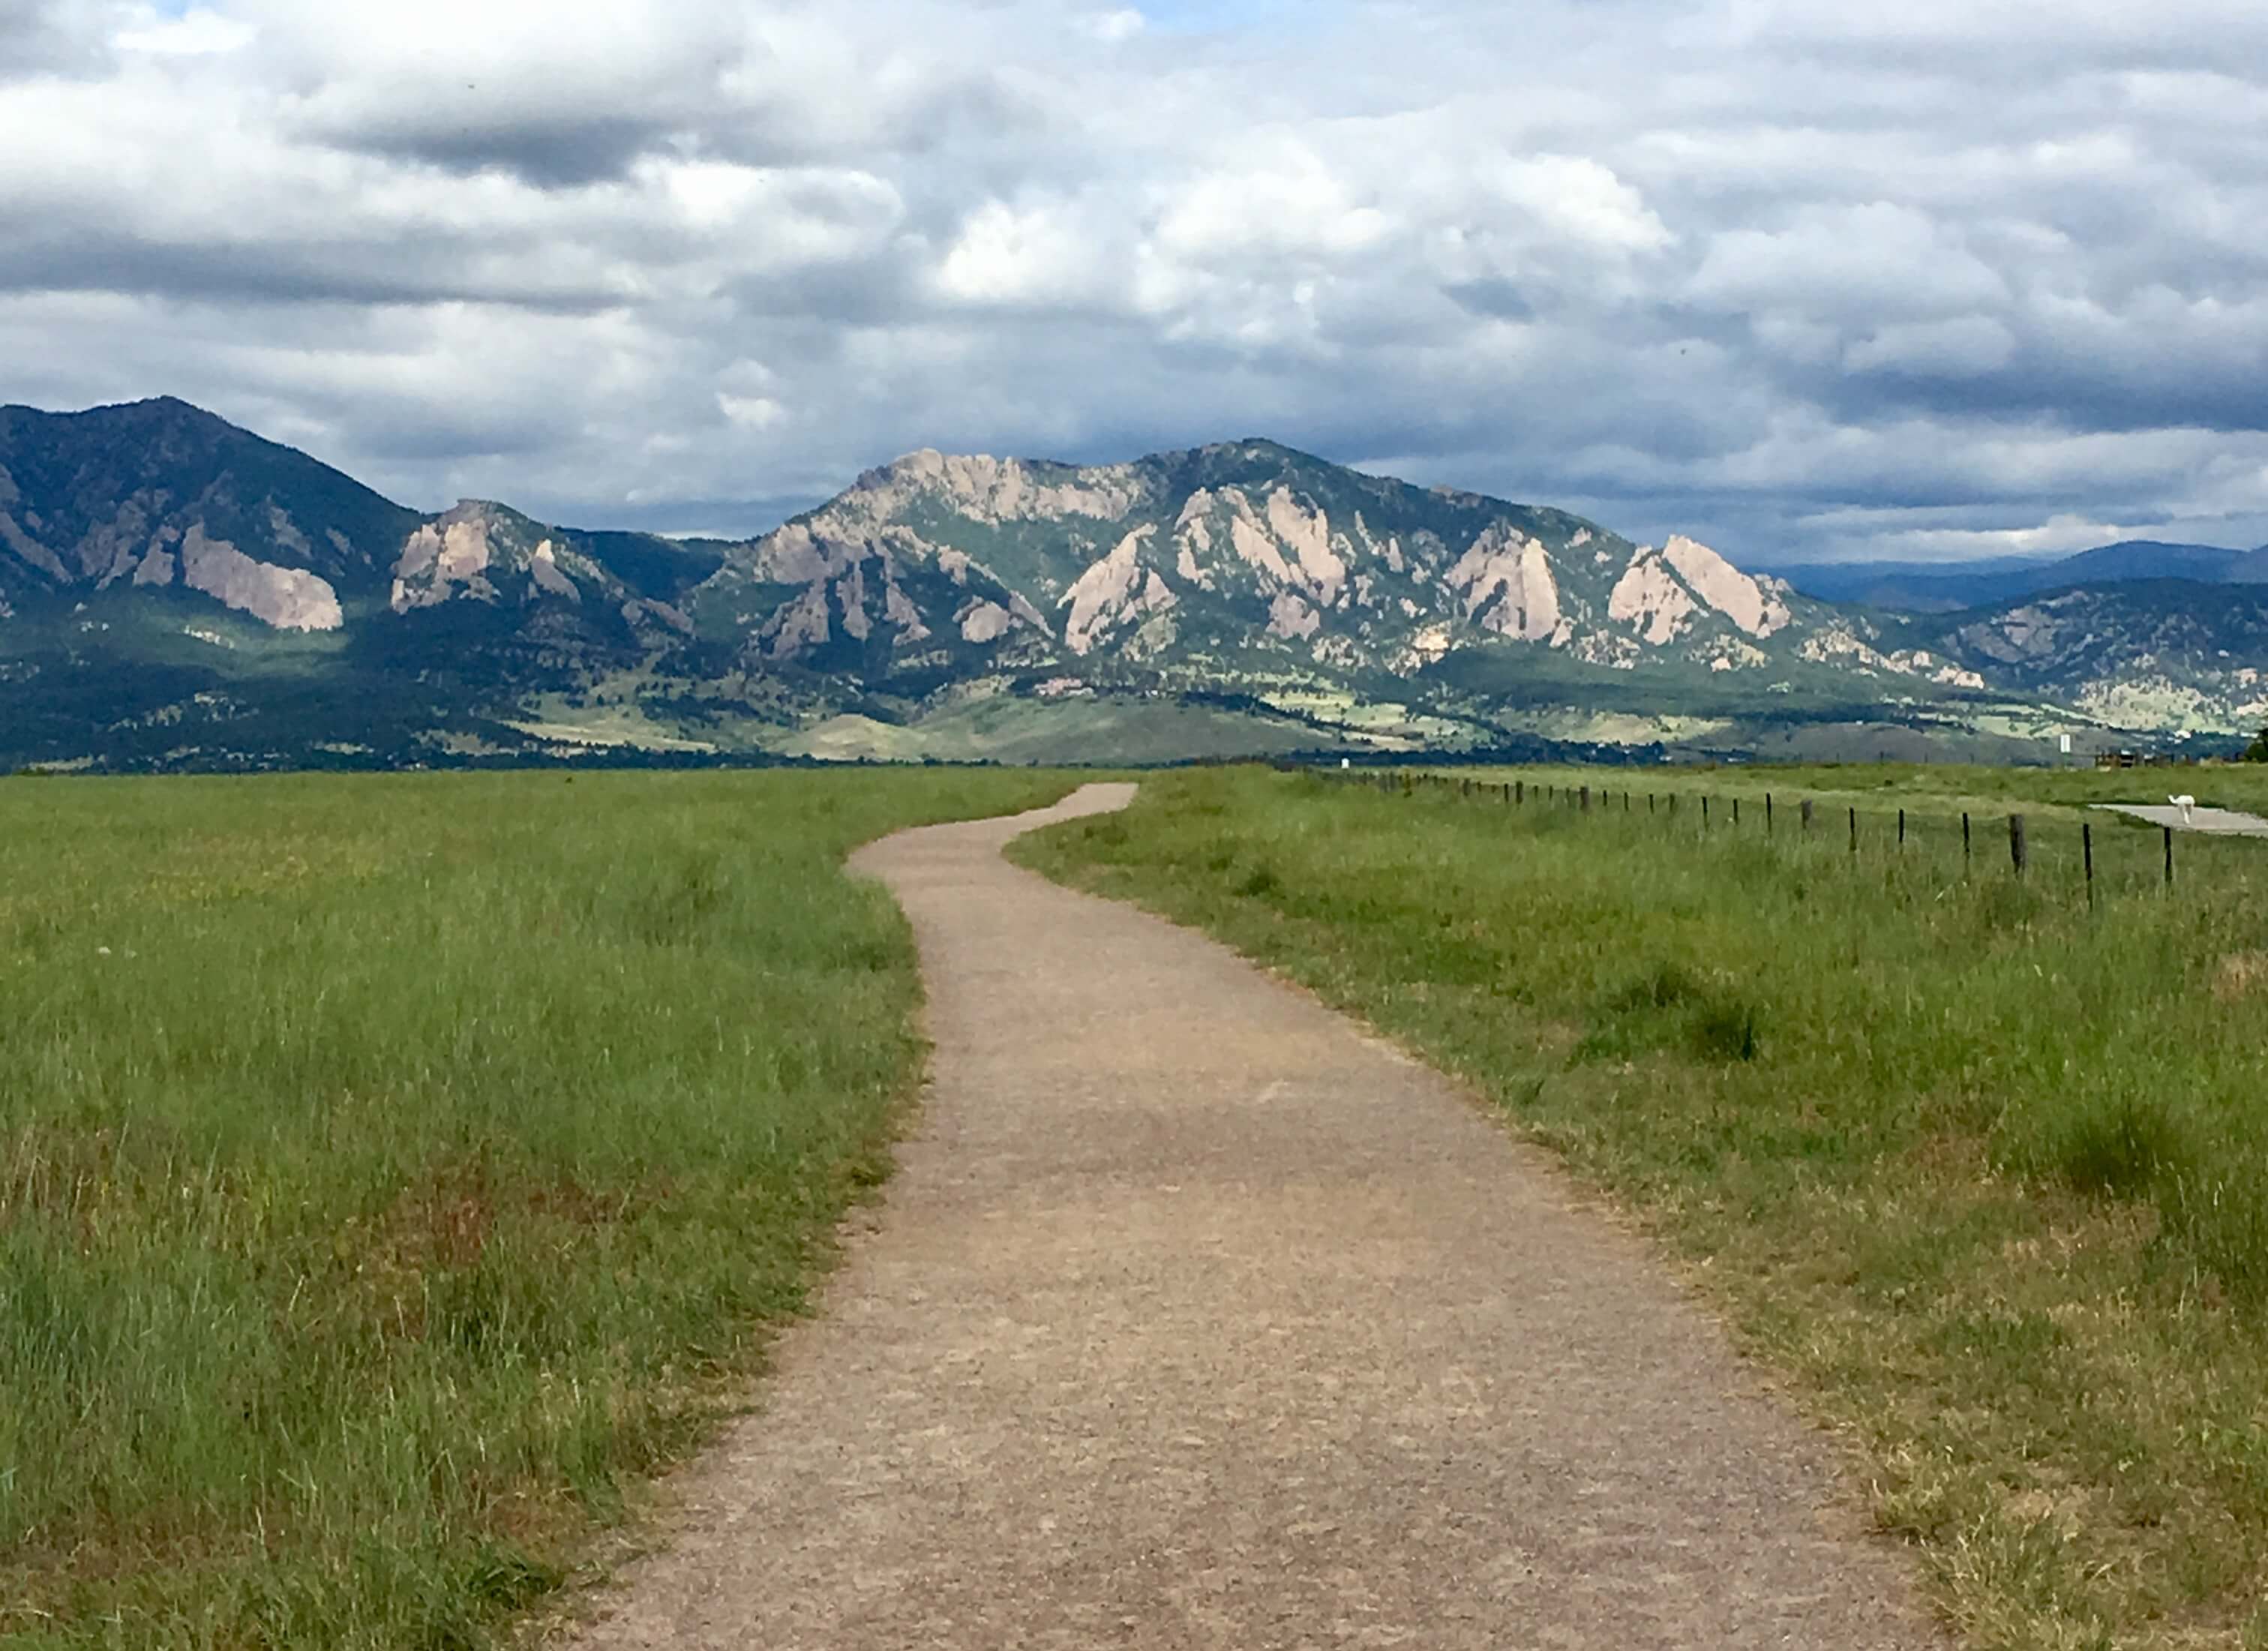 A dirt path lined with grass leads into the distance towards flatirons